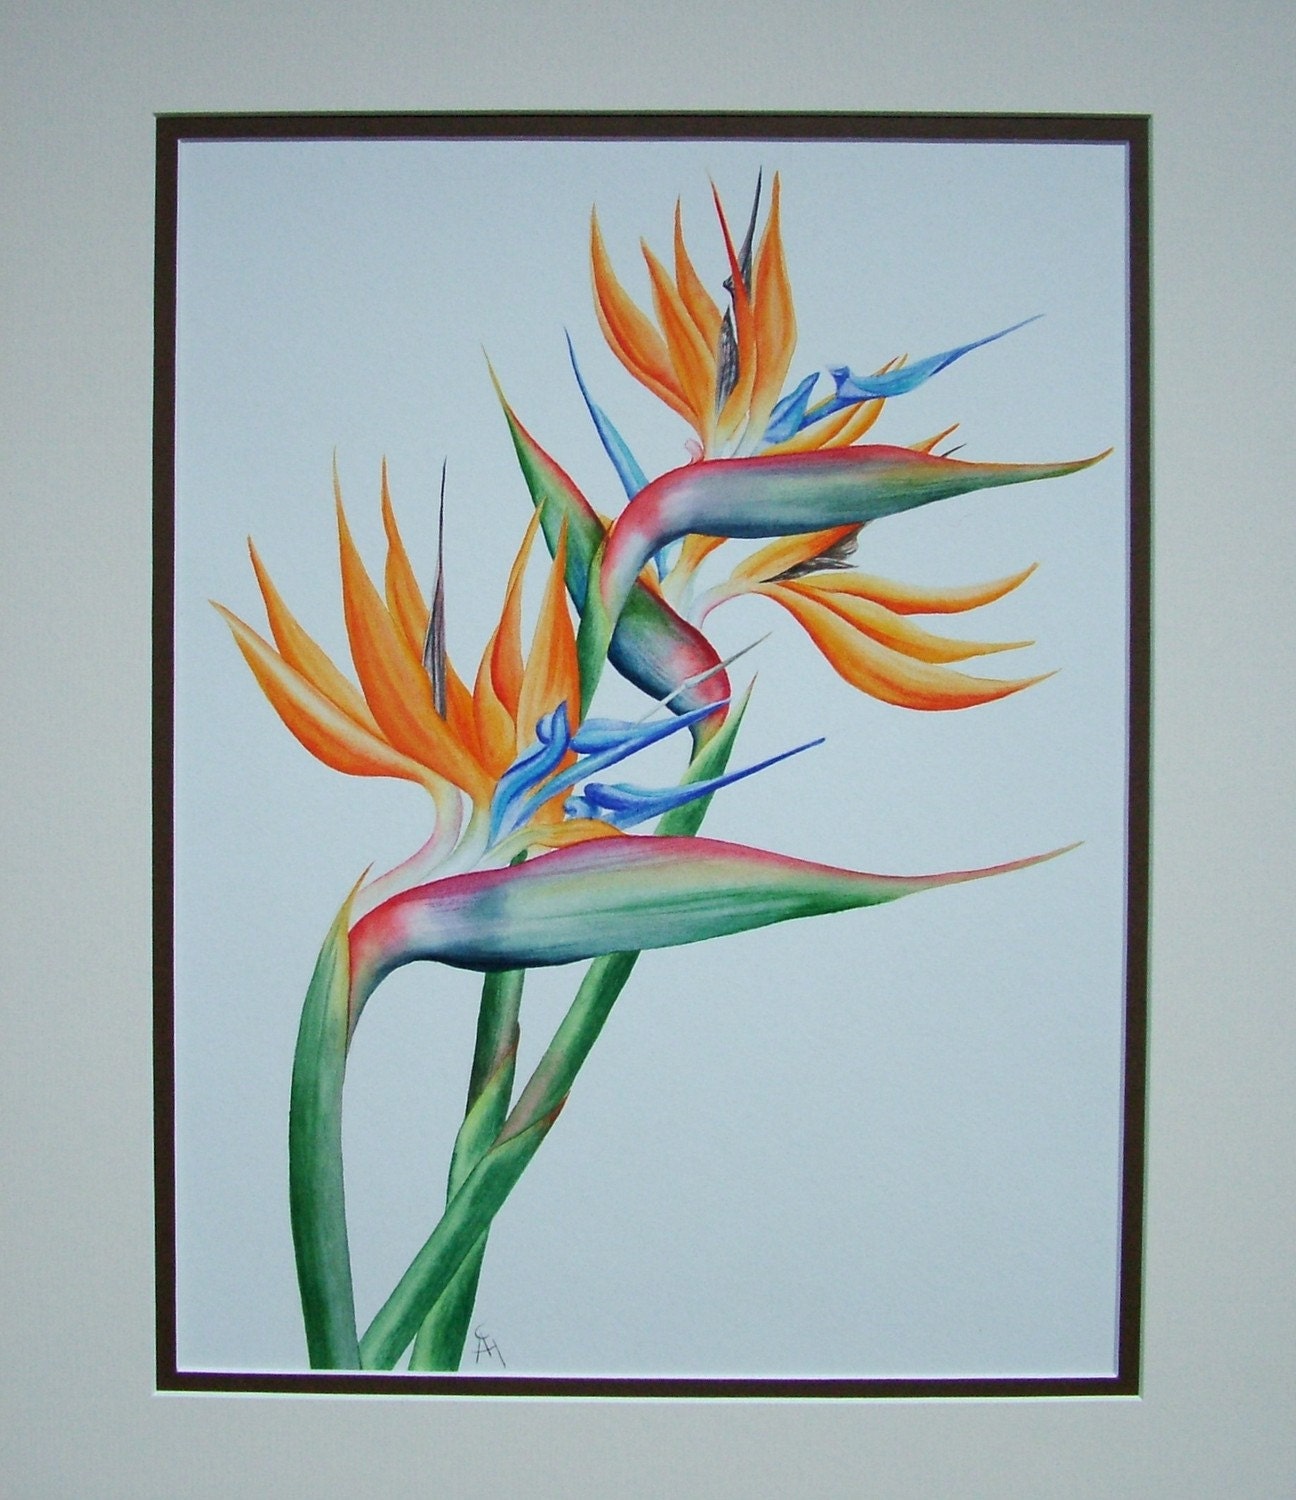 Original watercolour painting of the Bird of Paradise flower.